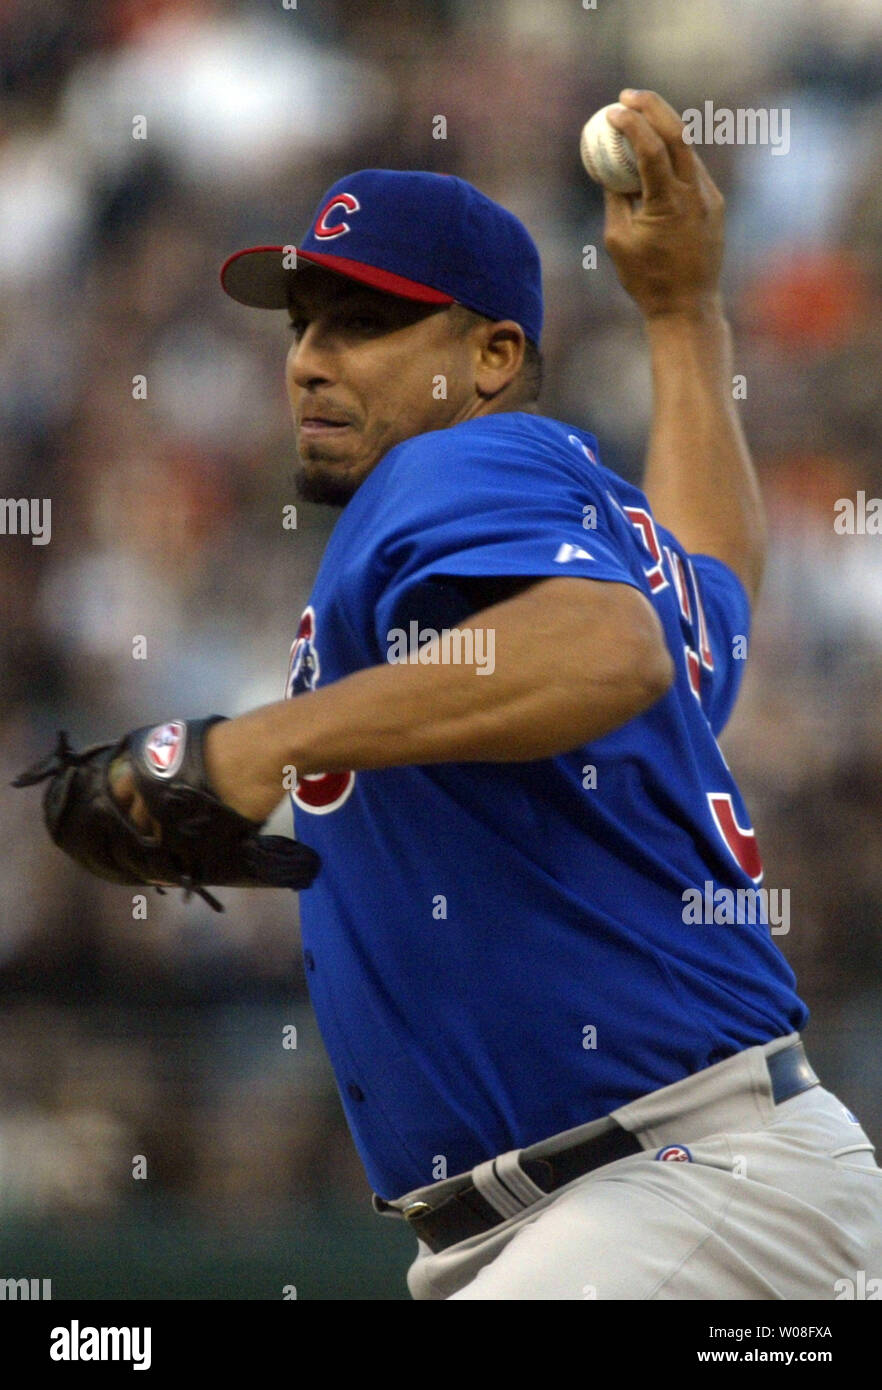 Chicago Cubs' Carlos Zambrano pitches to the San Francisco Giants at AT&T Park in San Francisco on May 10, 2006. The Cubs won 8-1.   (UPI Photo/Bruce Gordon) Stock Photo